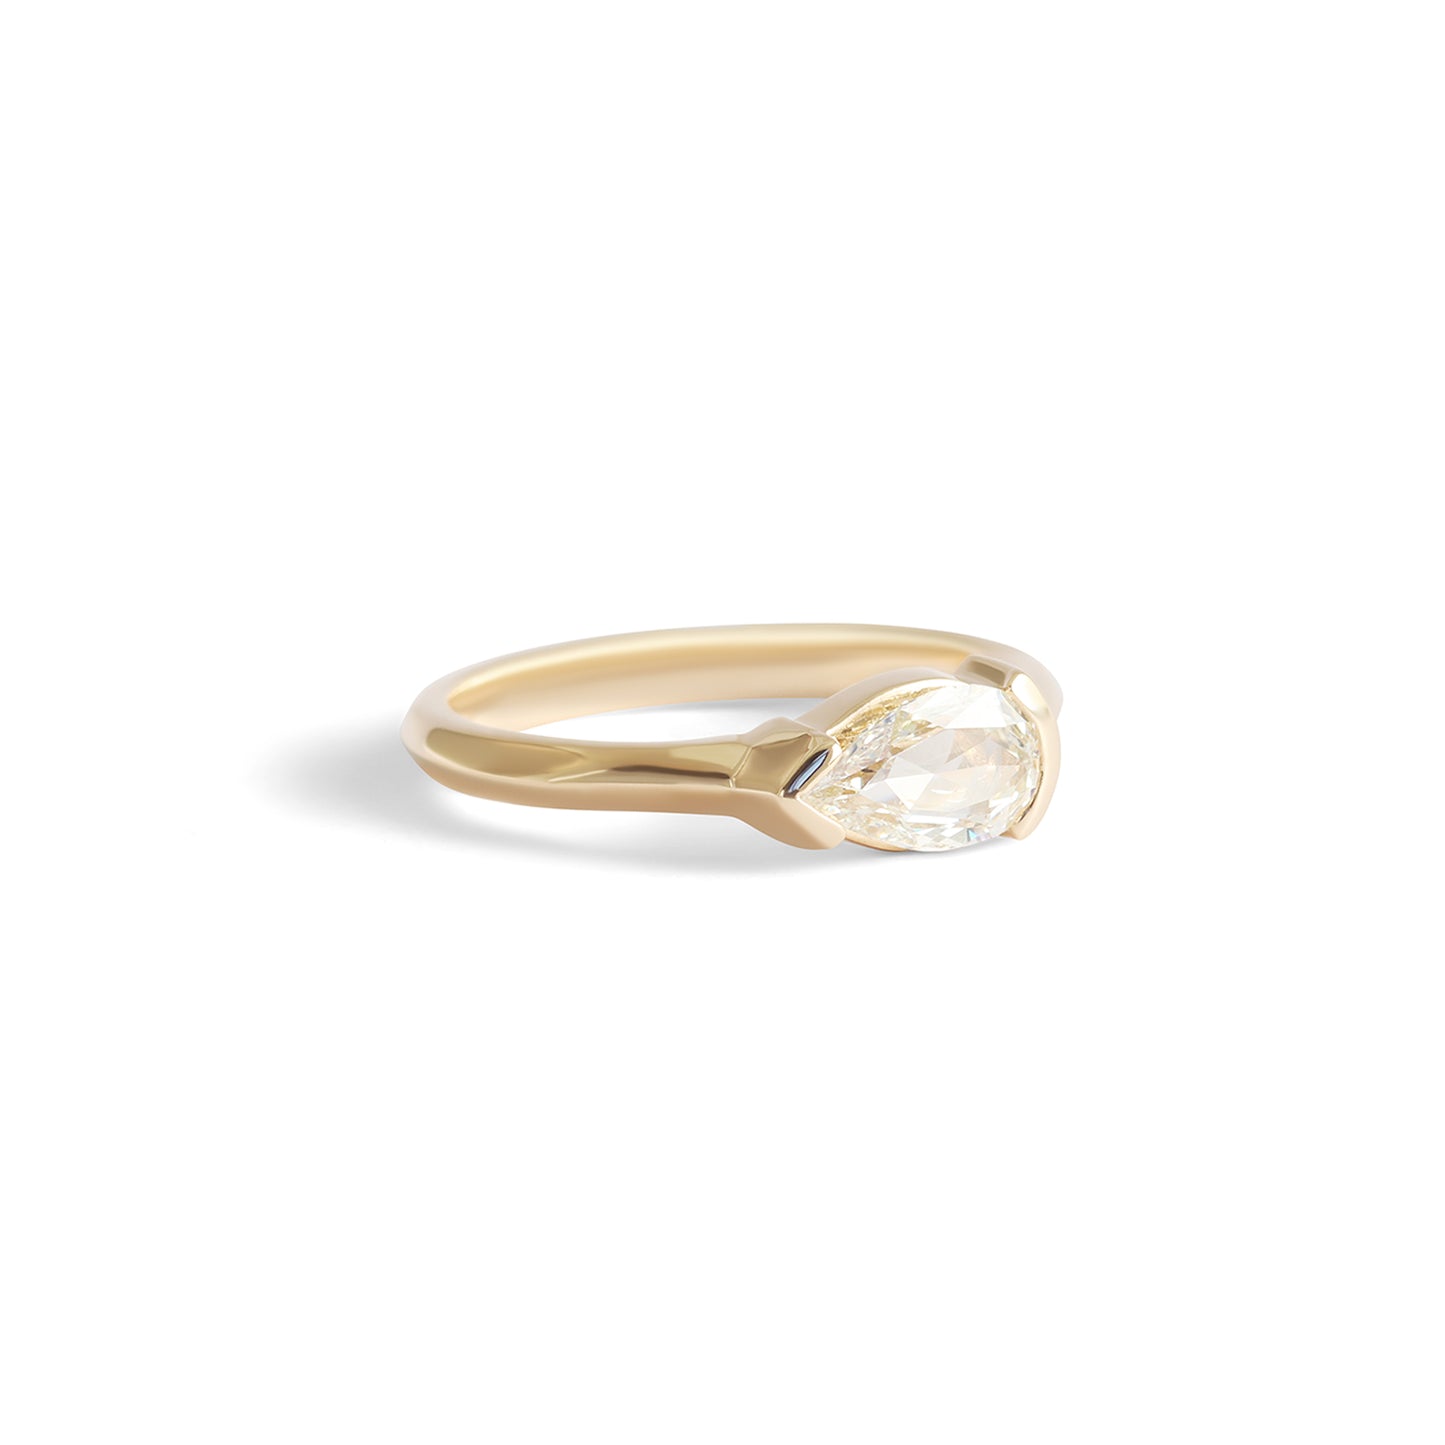 Load image into Gallery viewer, Sideways Ring / Pear Rose Cut Diamond 0.40ct - Goldpoint Studio - Greenpoint, Brooklyn - Fine Jewelry
